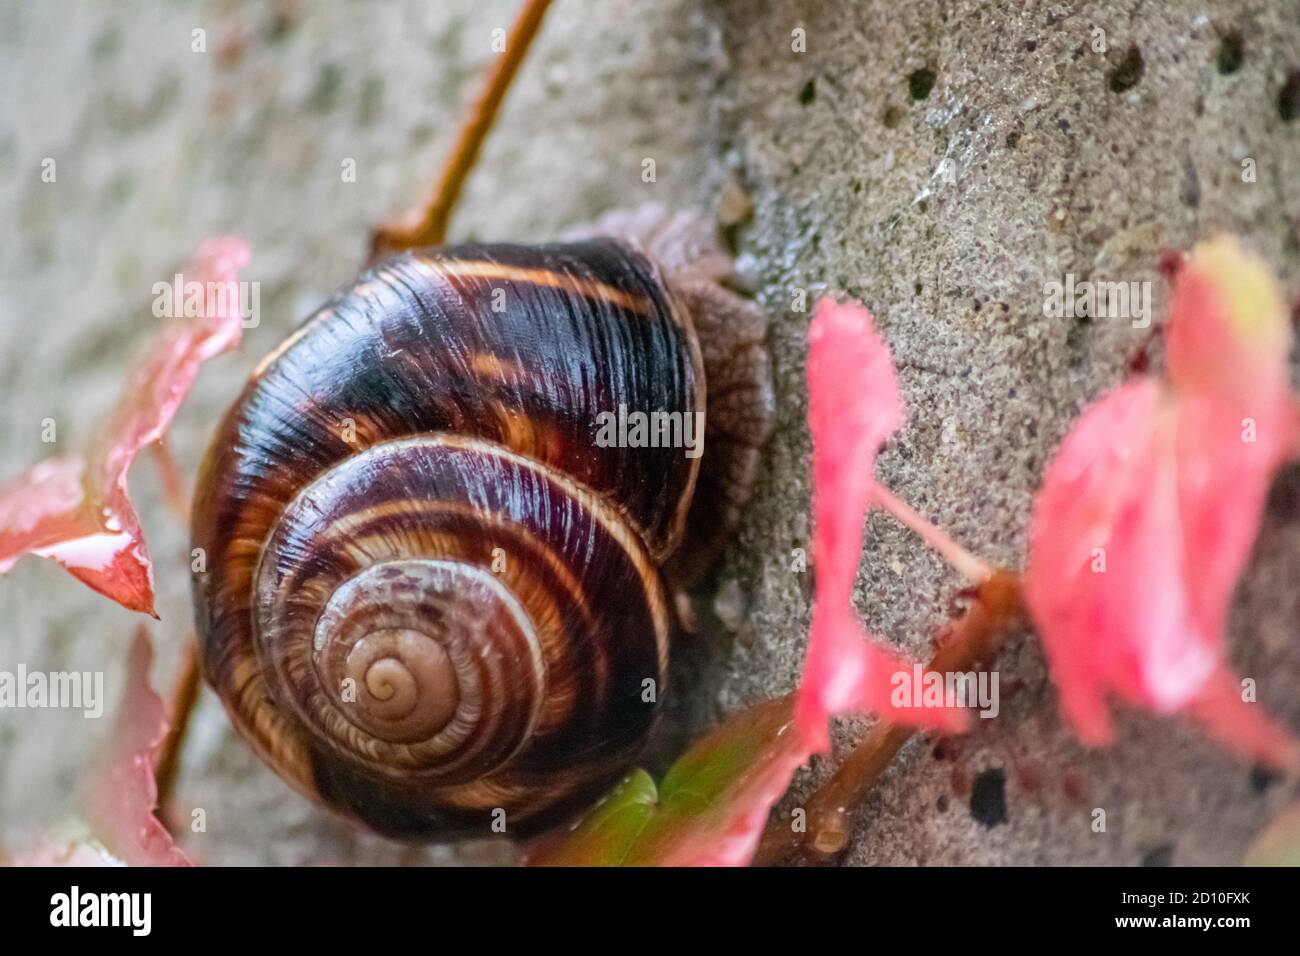 Big striped grapevine snail with a big shell in close-up and macro view shows interesting details of feelers, eyes, helix shell, skin and foot Stock Photo